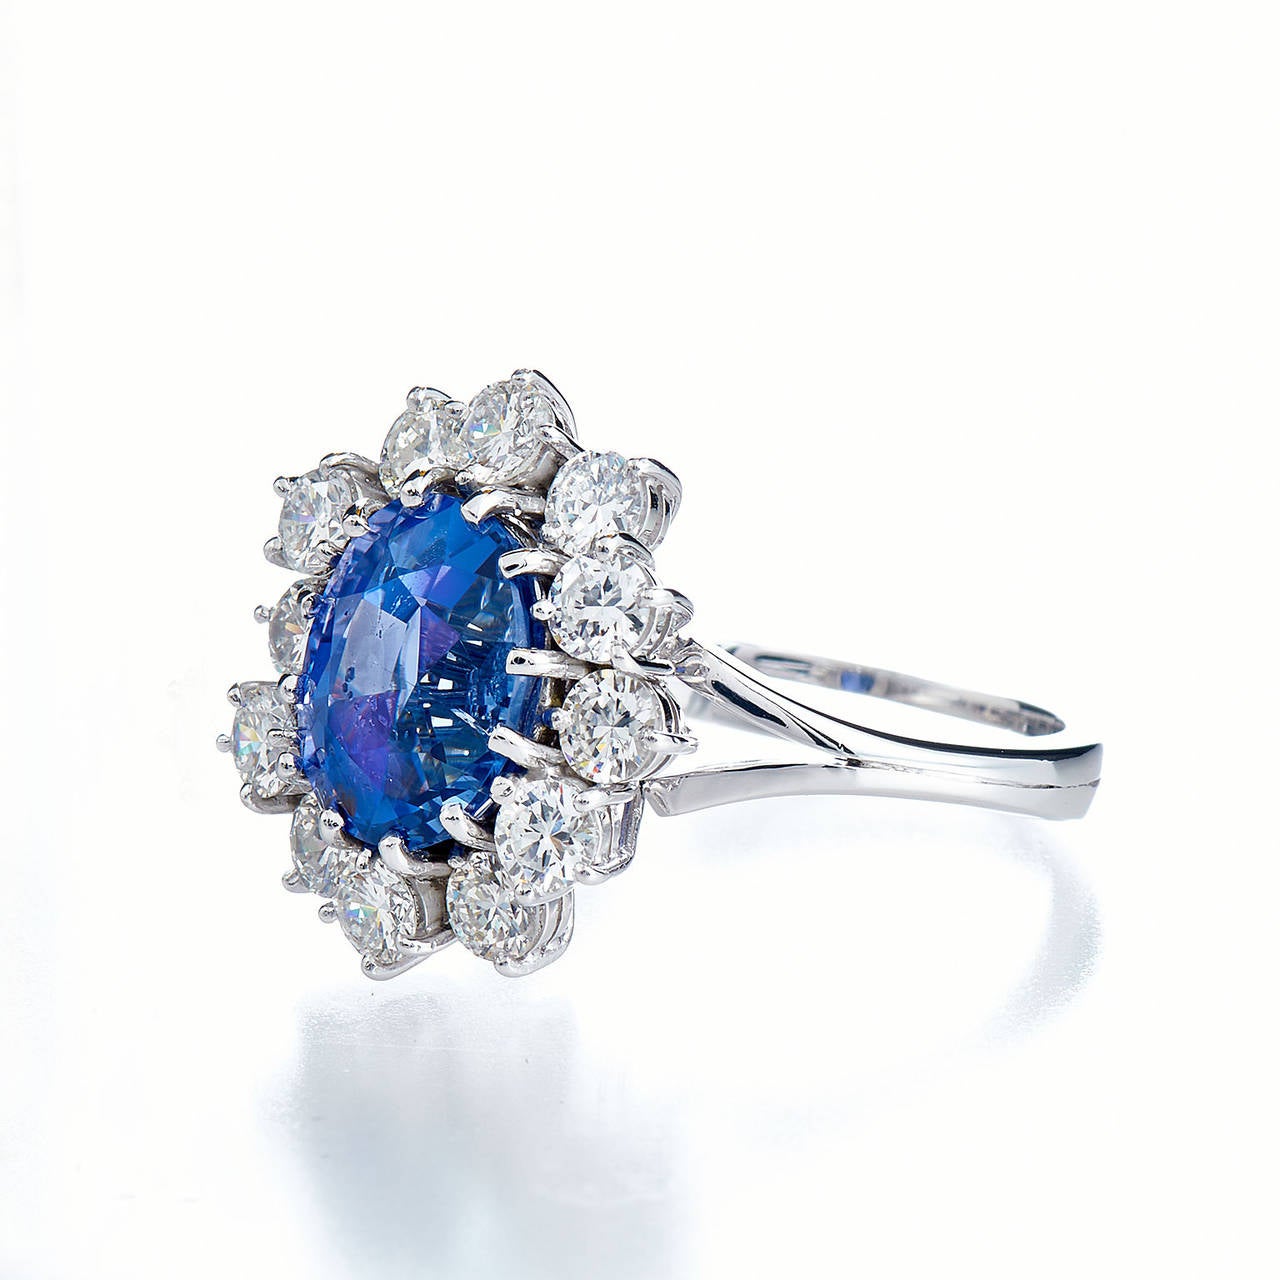 A true definition of natural beauty. This no heat  4.84 carat violetish blue sapphire is an untainted gift from mother nature featuring clarity, color and purity that can not be replicated.  Even more unique to this piece, it exhibits color change